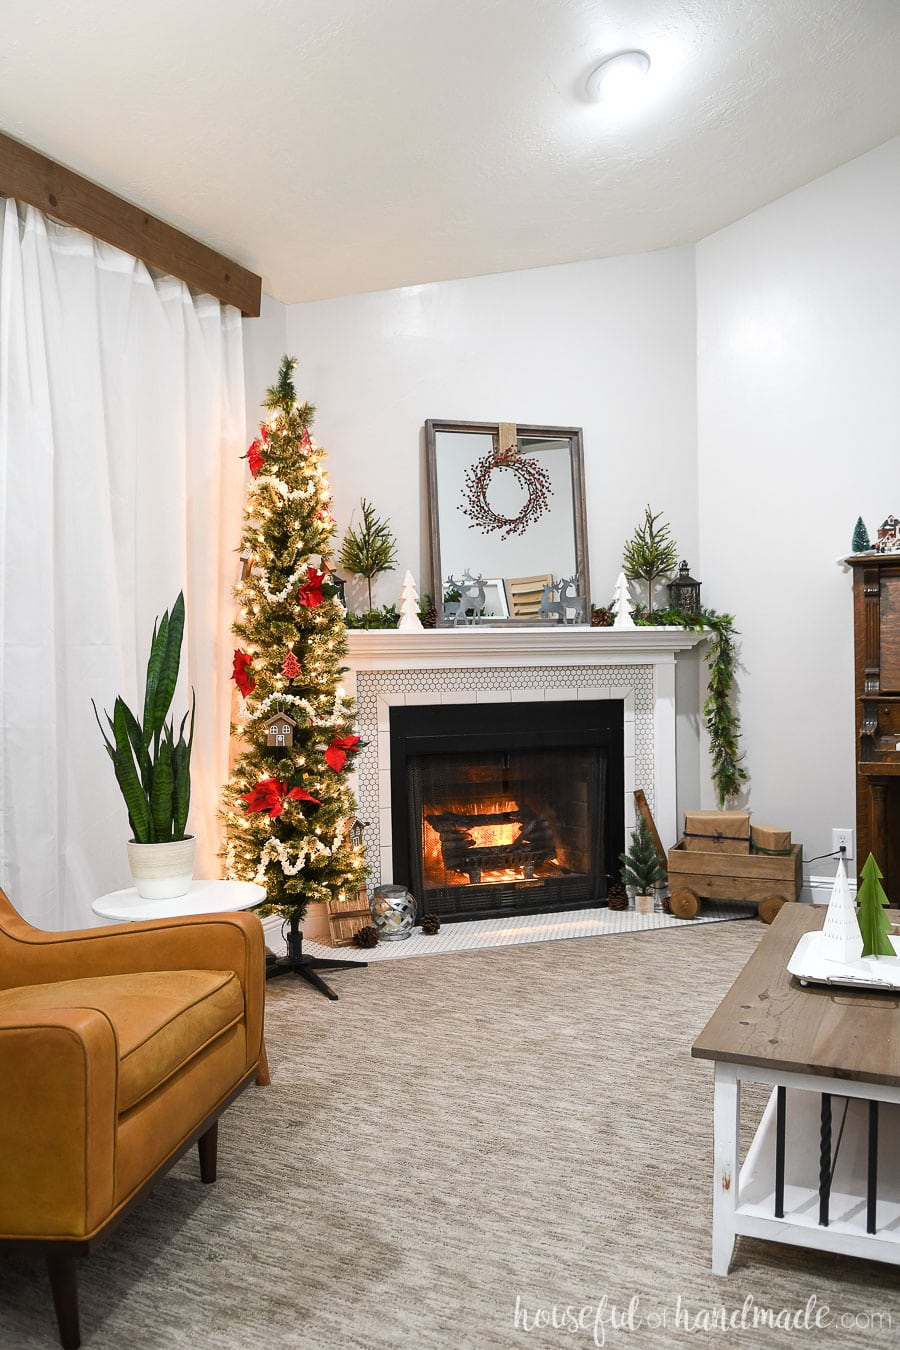 Full view of the living room decorated for the Classic Christmas home tour. Pencil tree next to the fireplace decorated with poinsettias and popcorn garland.